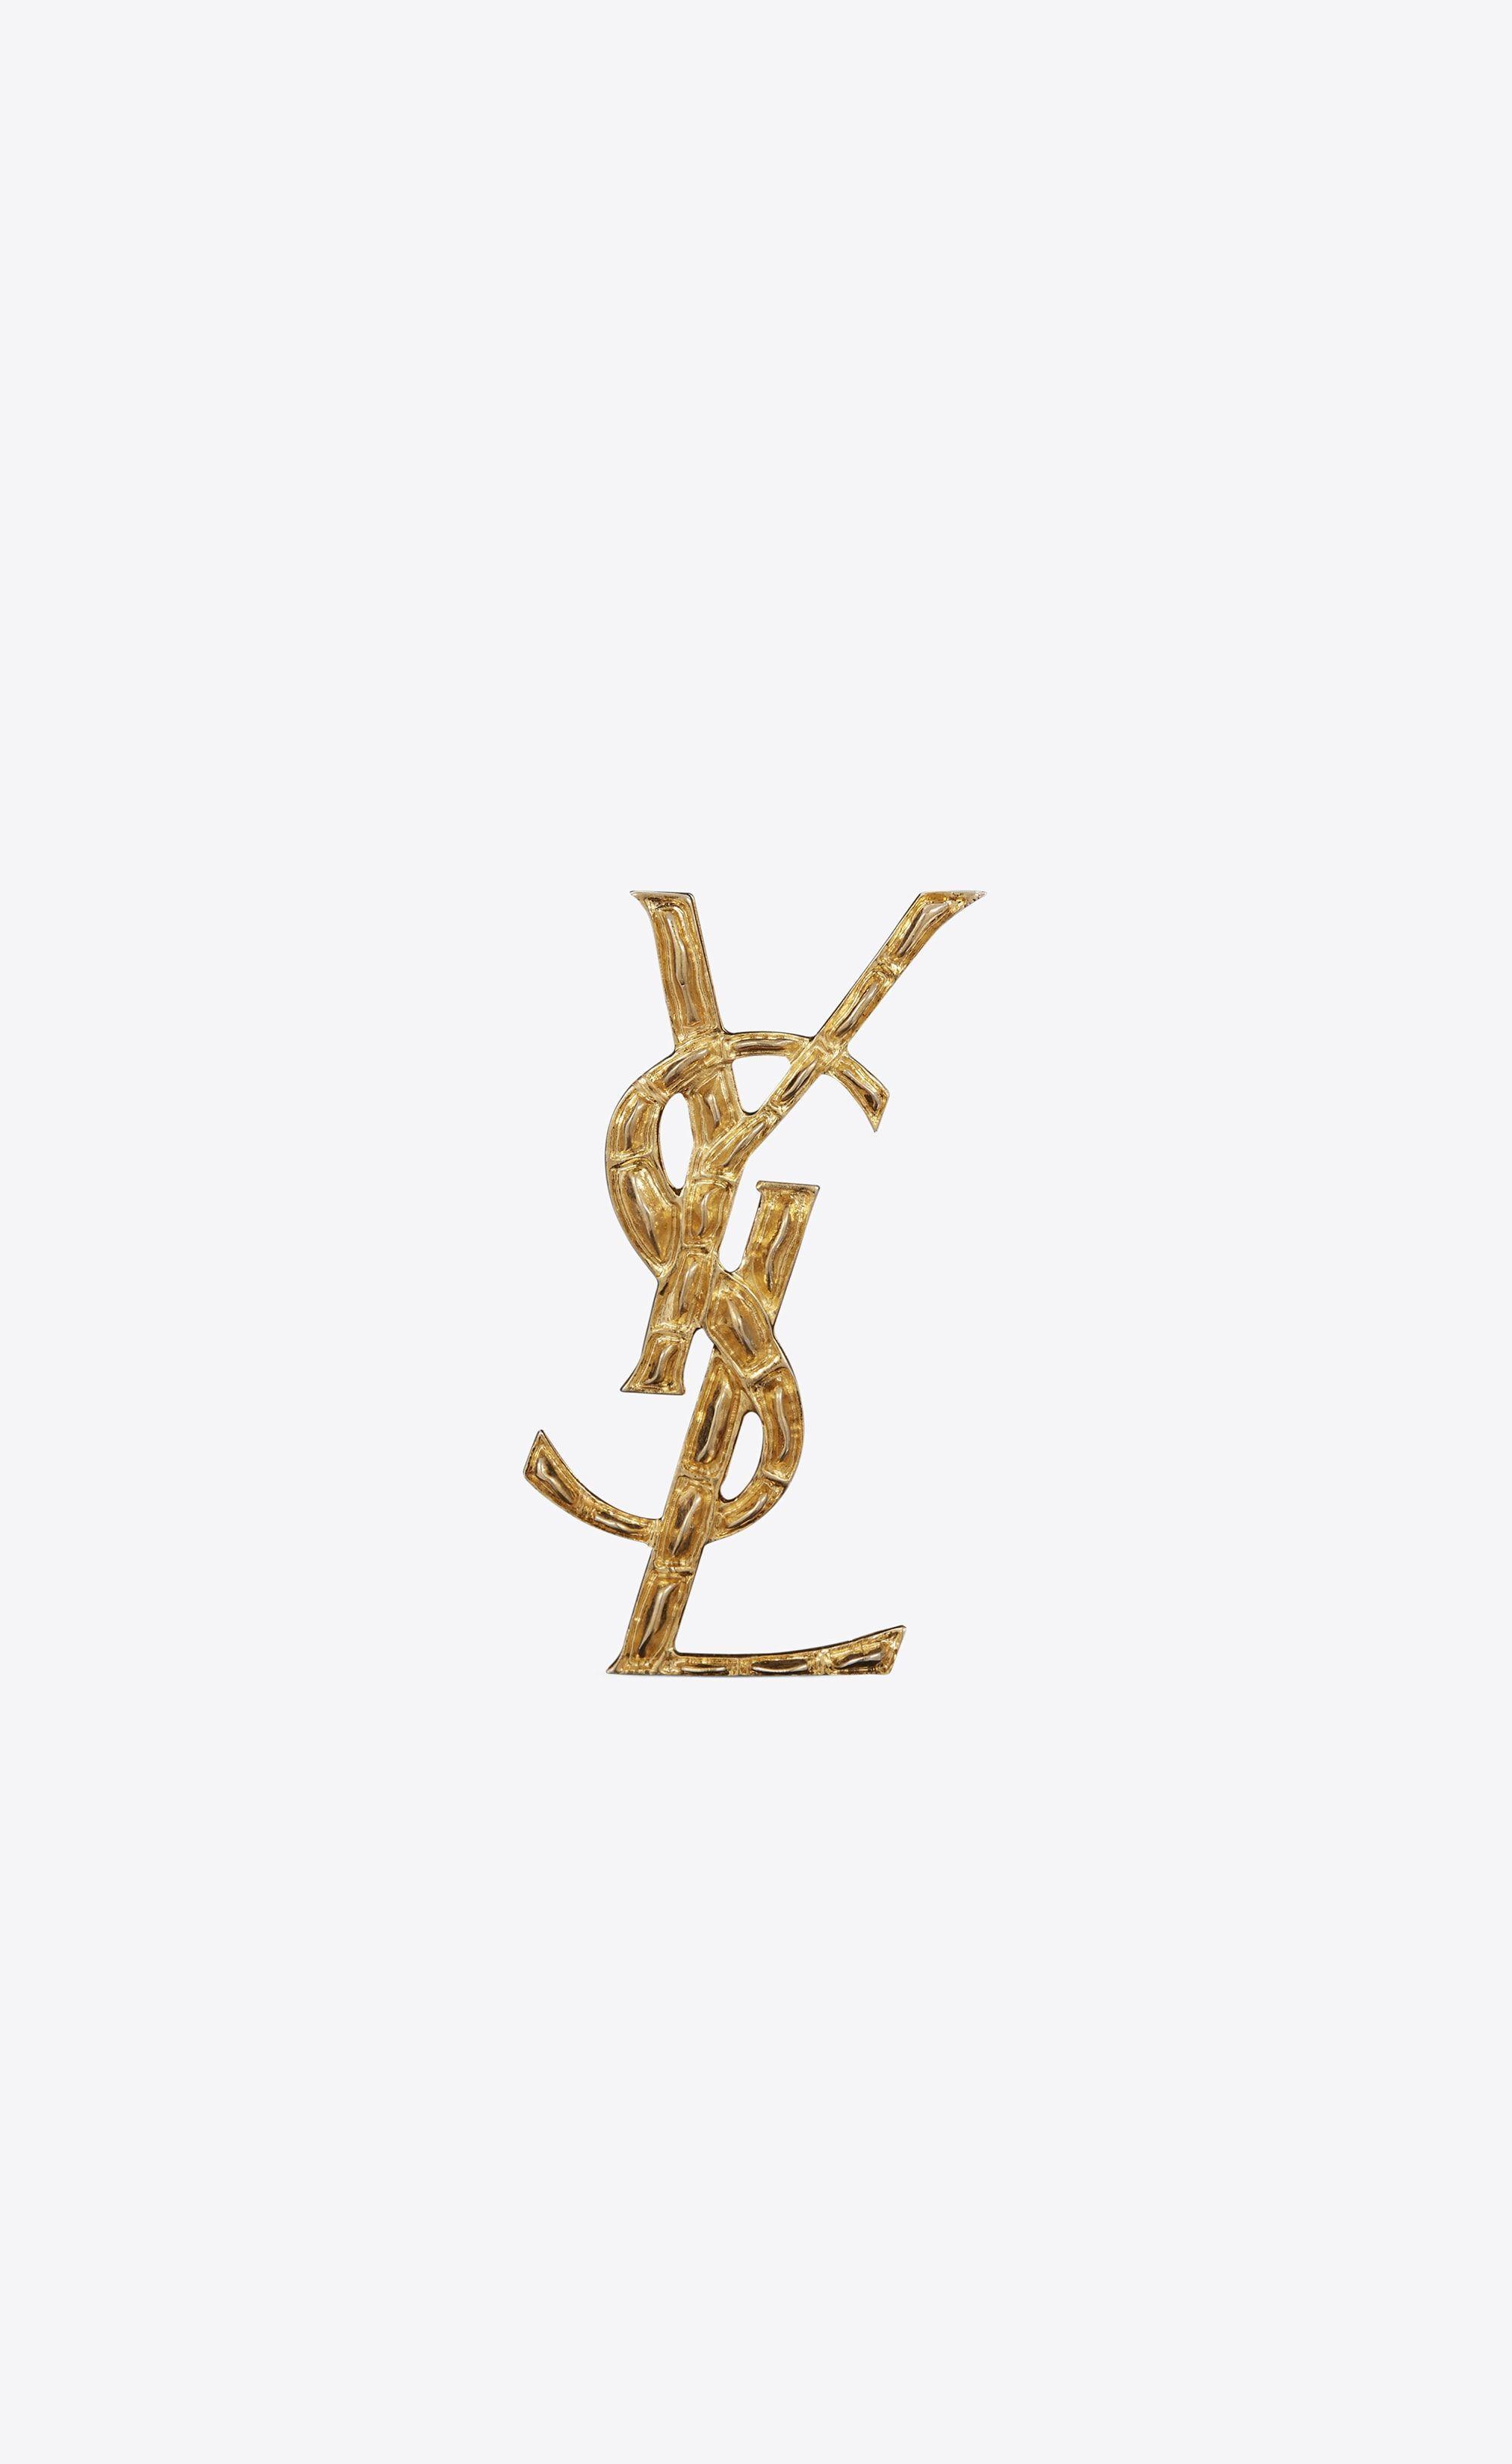 Yves Saint Laurent Iphone 6 Wallpaper 58 Off Www Drmarcosshiroma Com Br